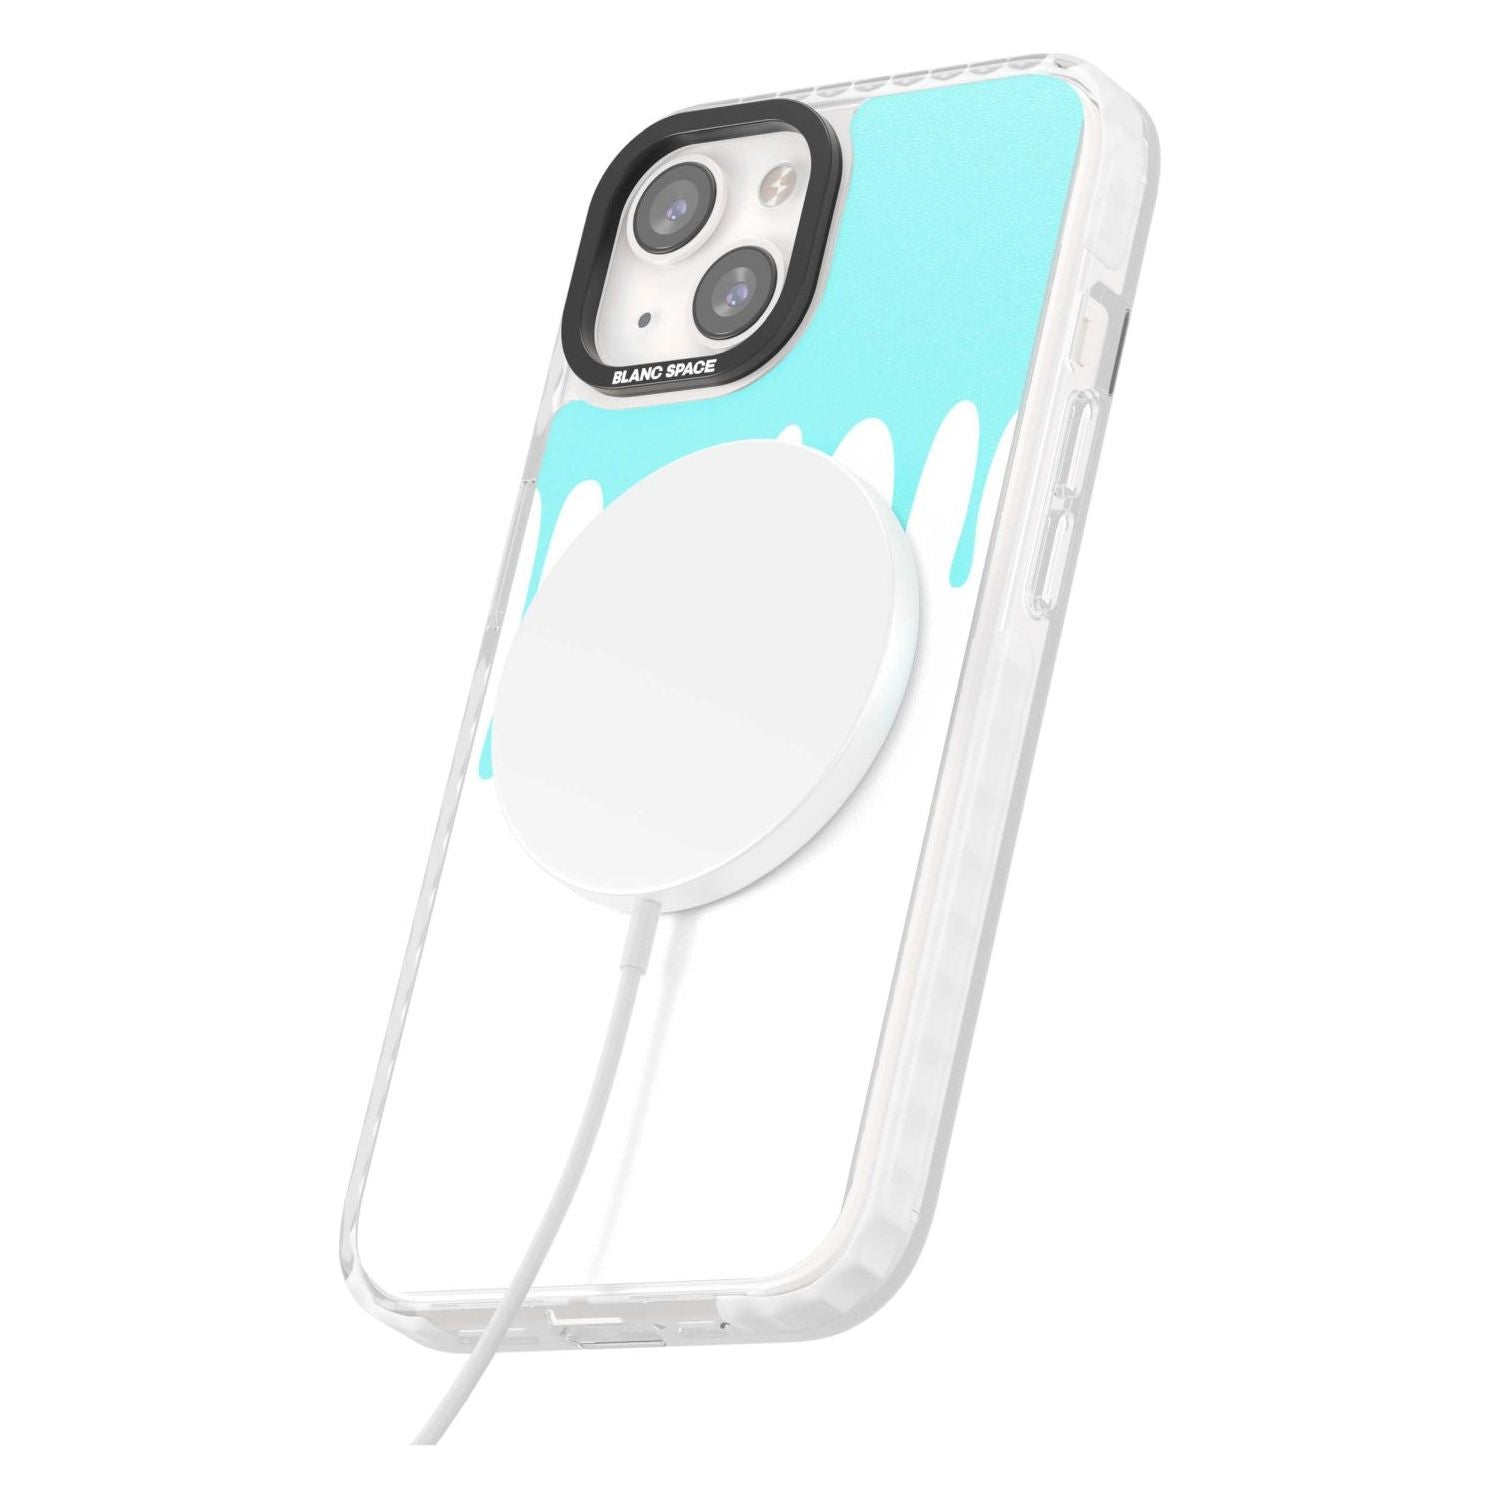 Melted Effect: Teal & White Phone Case iPhone 15 Pro Max / Black Impact Case,iPhone 15 Plus / Black Impact Case,iPhone 15 Pro / Black Impact Case,iPhone 15 / Black Impact Case,iPhone 15 Pro Max / Impact Case,iPhone 15 Plus / Impact Case,iPhone 15 Pro / Impact Case,iPhone 15 / Impact Case,iPhone 15 Pro Max / Magsafe Black Impact Case,iPhone 15 Plus / Magsafe Black Impact Case,iPhone 15 Pro / Magsafe Black Impact Case,iPhone 15 / Magsafe Black Impact Case,iPhone 14 Pro Max / Black Impact Case,iPhone 14 Plus /